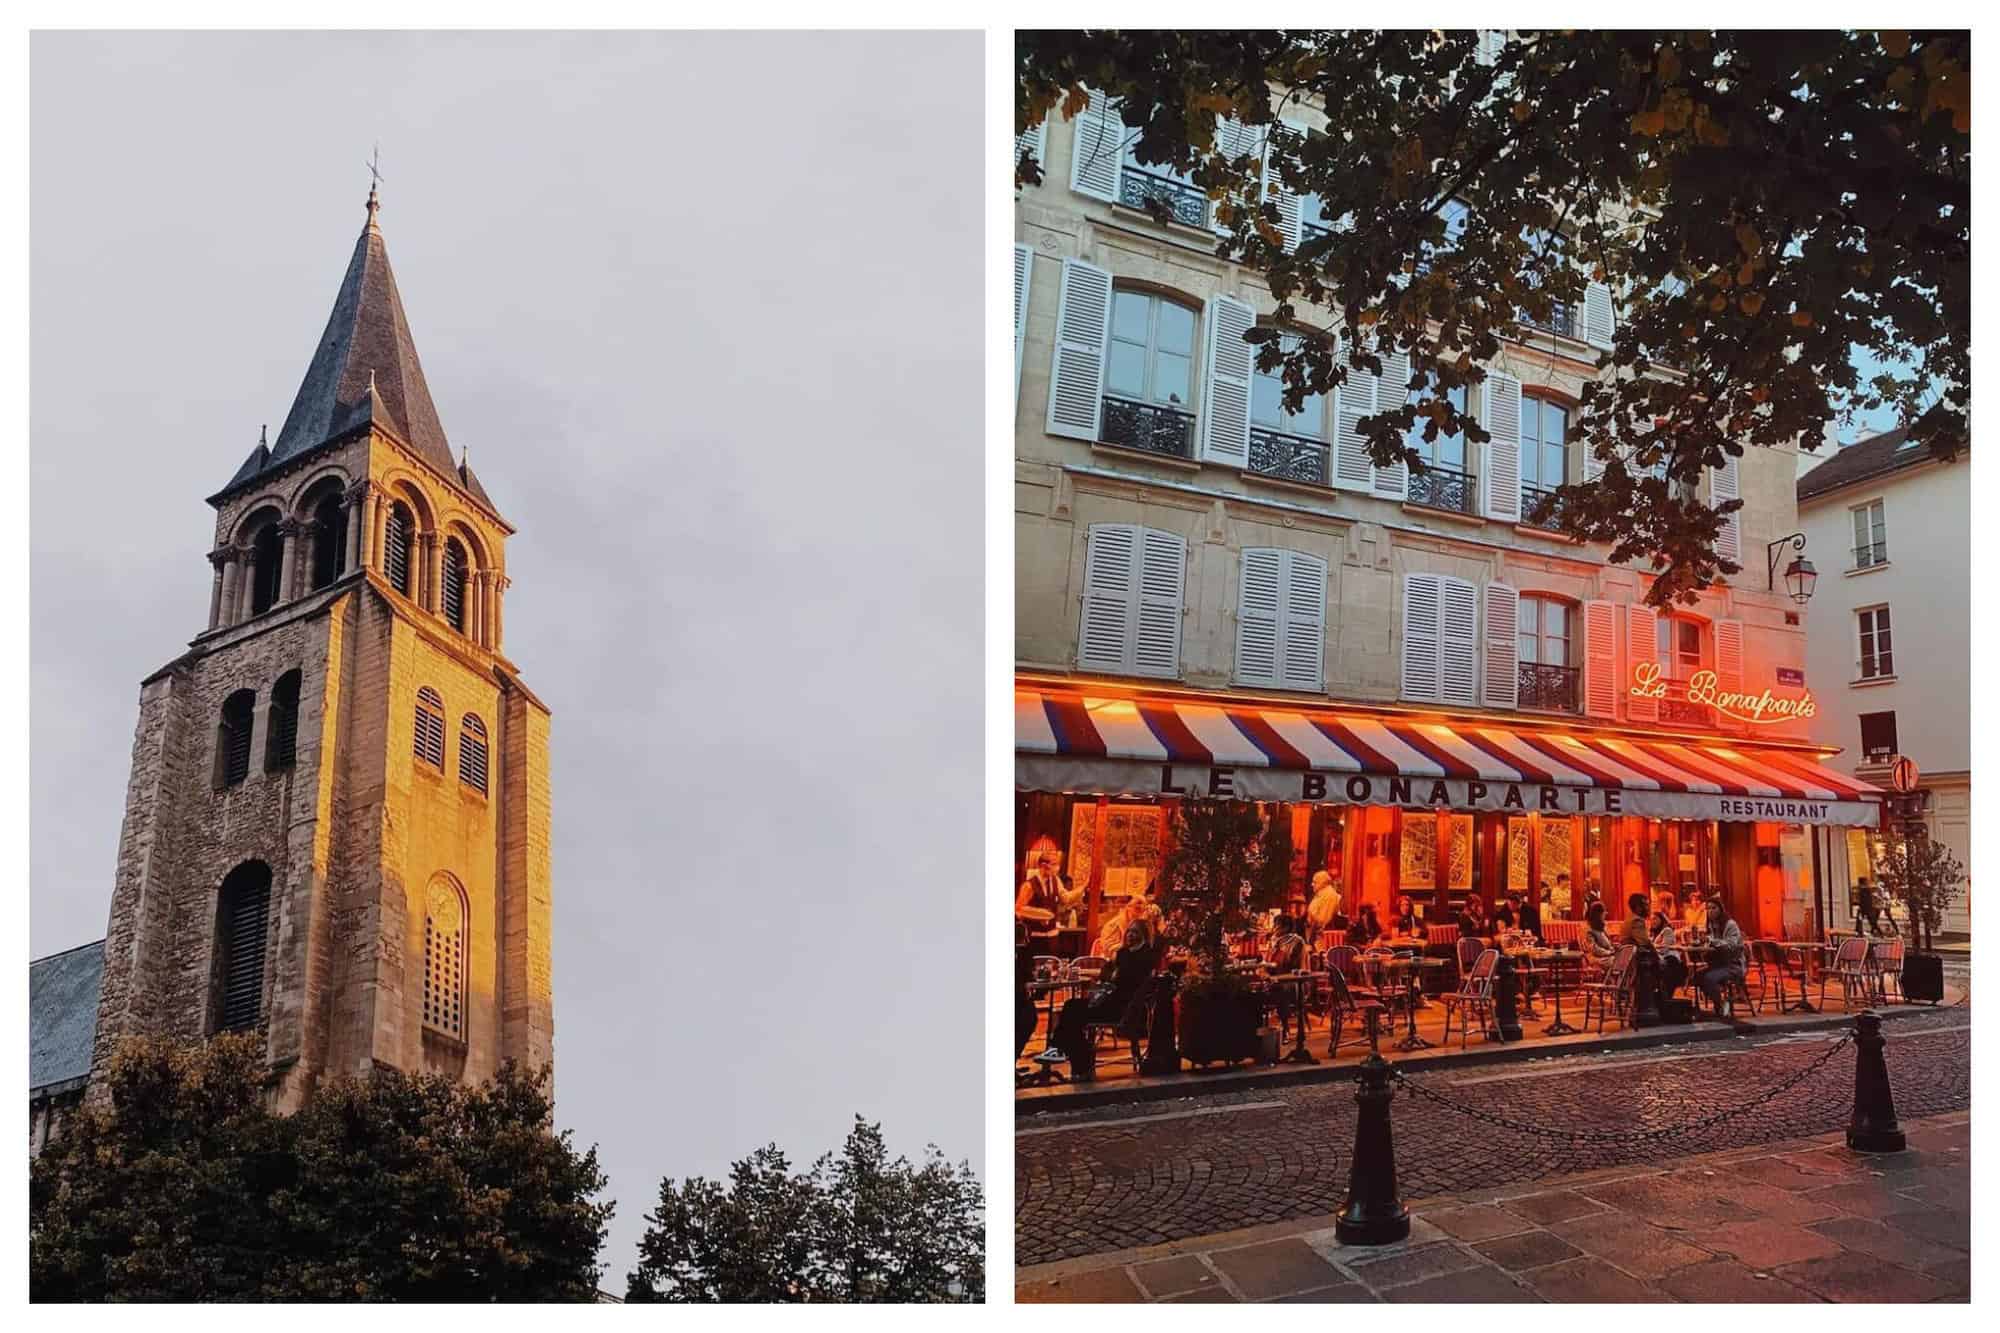 Left: a church steeple with sun shining on it at dusk. There are trees visible near the base of the steeple. Right: Exterior of a Parisian cafe. The words "Le Bonaparte" are lit up in red lights and the awning is white with blue and red stripes. There are several people sitting at tables in front of the cafe.